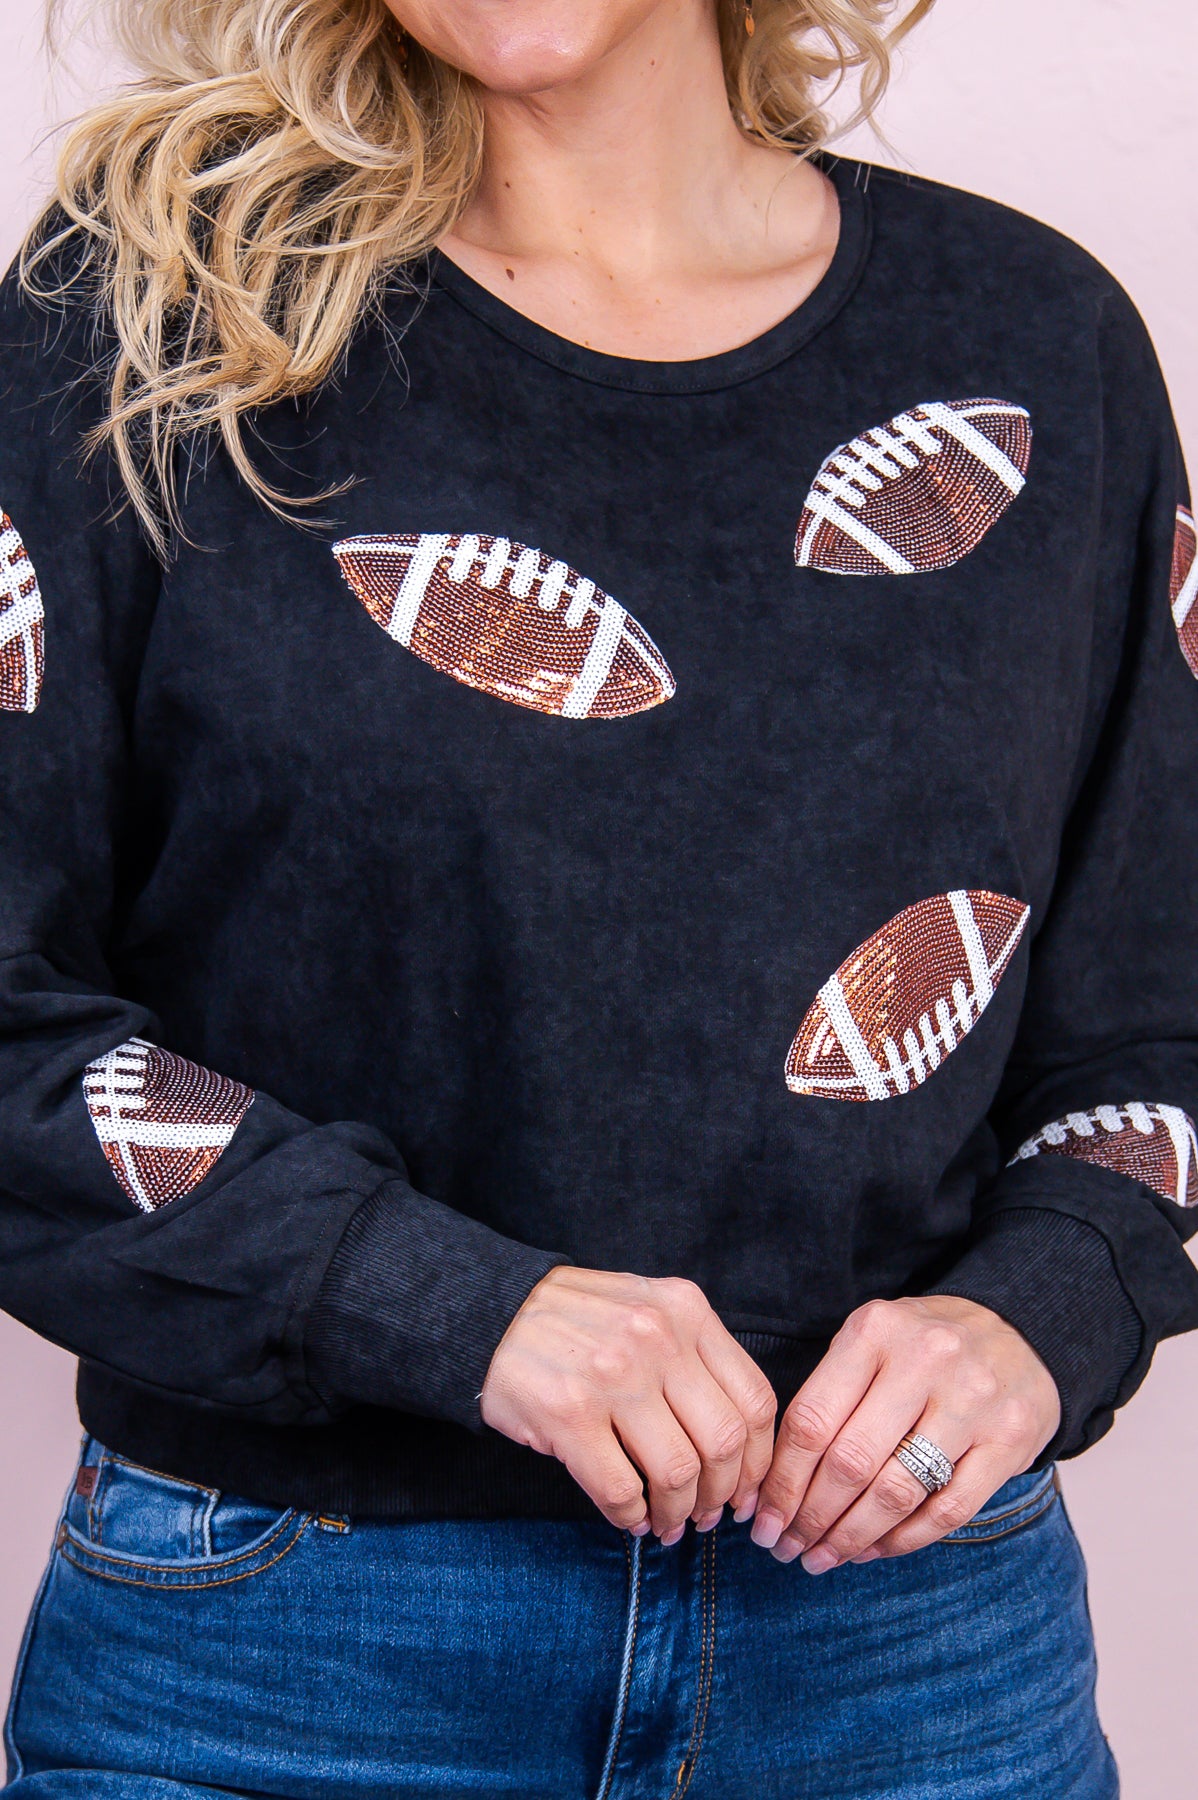 Tailgates And Touchdowns Black/Brown Cropped Sequin Football Top - T8190BK